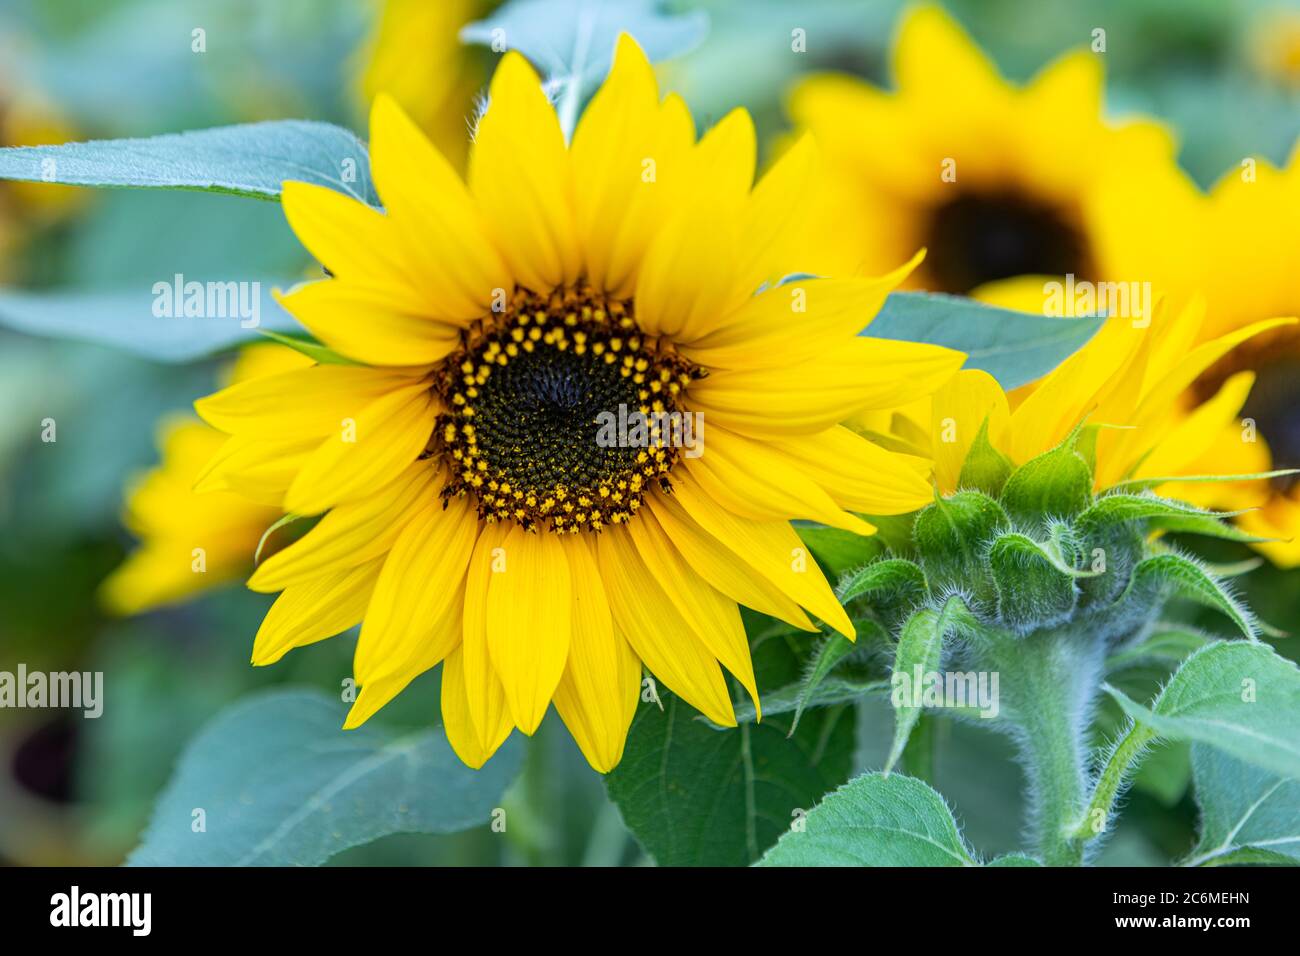 Sunflower with Green Bud Sunflower Blossom. Healthy Lifestyles, Ecology, Organic Farming, Smallholding, Gardening, health concept, nature concept. Stock Photo